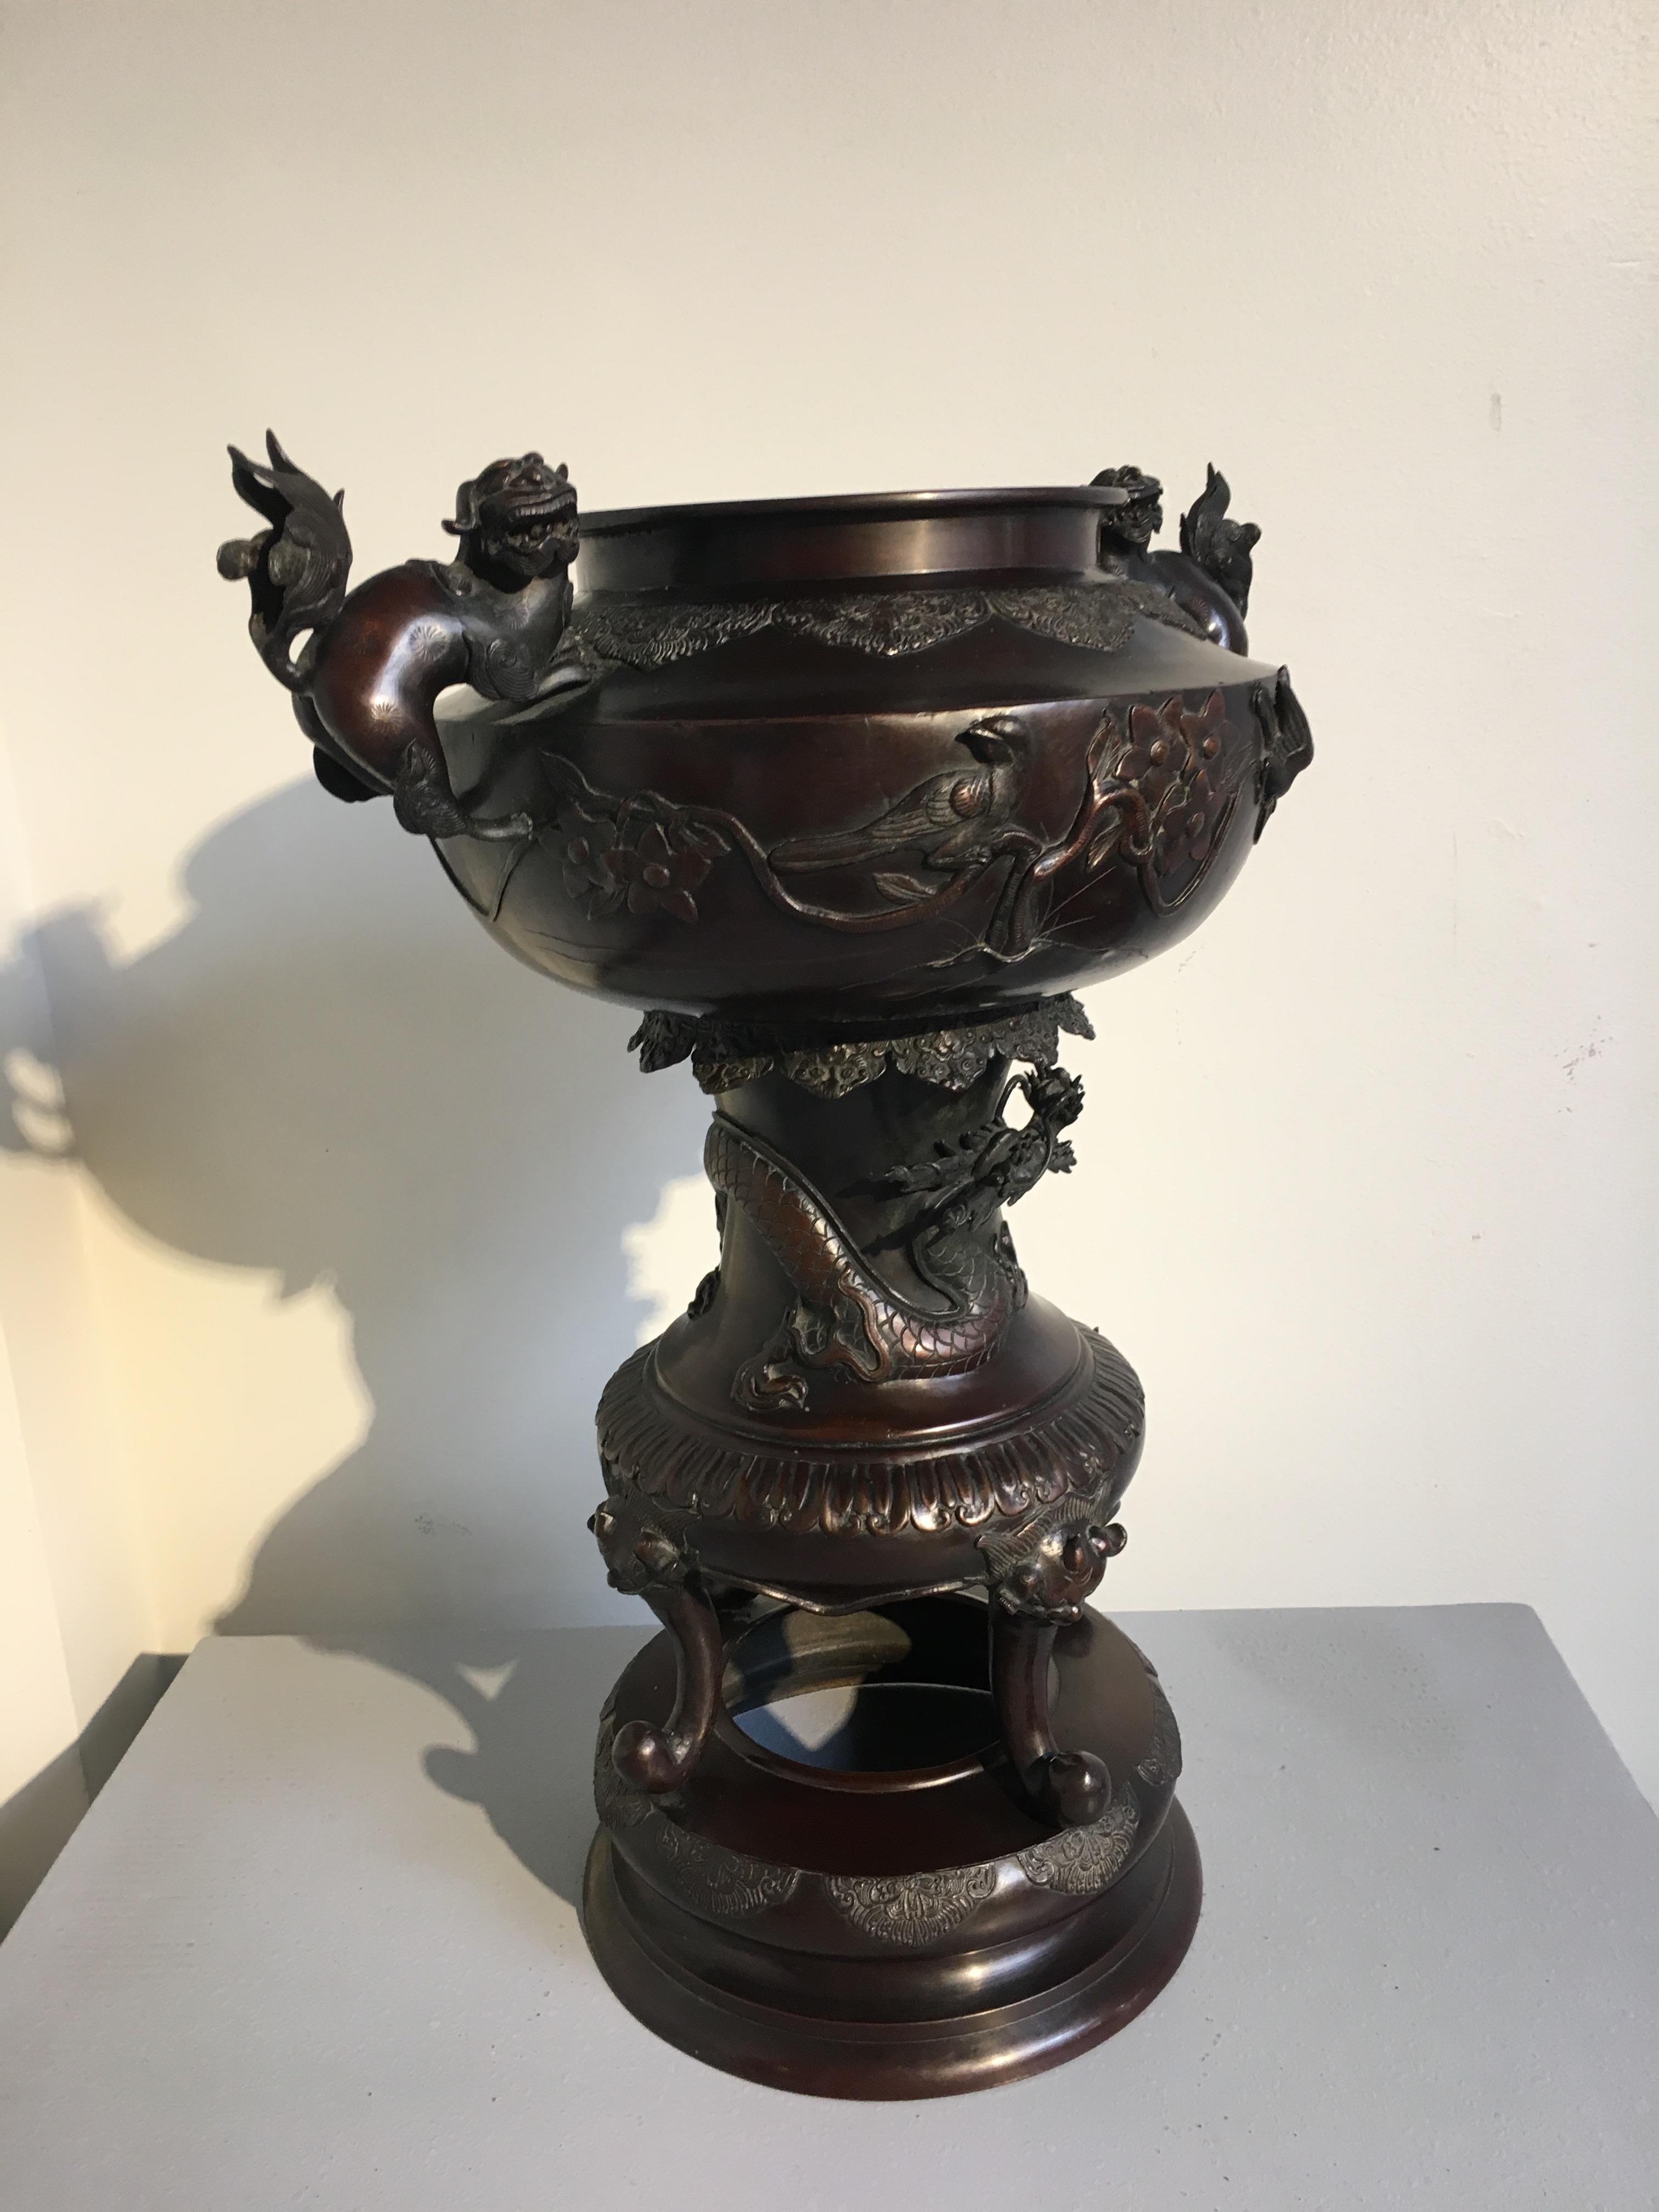 A large and attractive Japanese bronze incense burner, Meiji period, late 19th or early 20th century.
The bulbous body of the censer supported by a large pedestal foot and set upon an integral stand.
The bowl of the censer is decorated with a